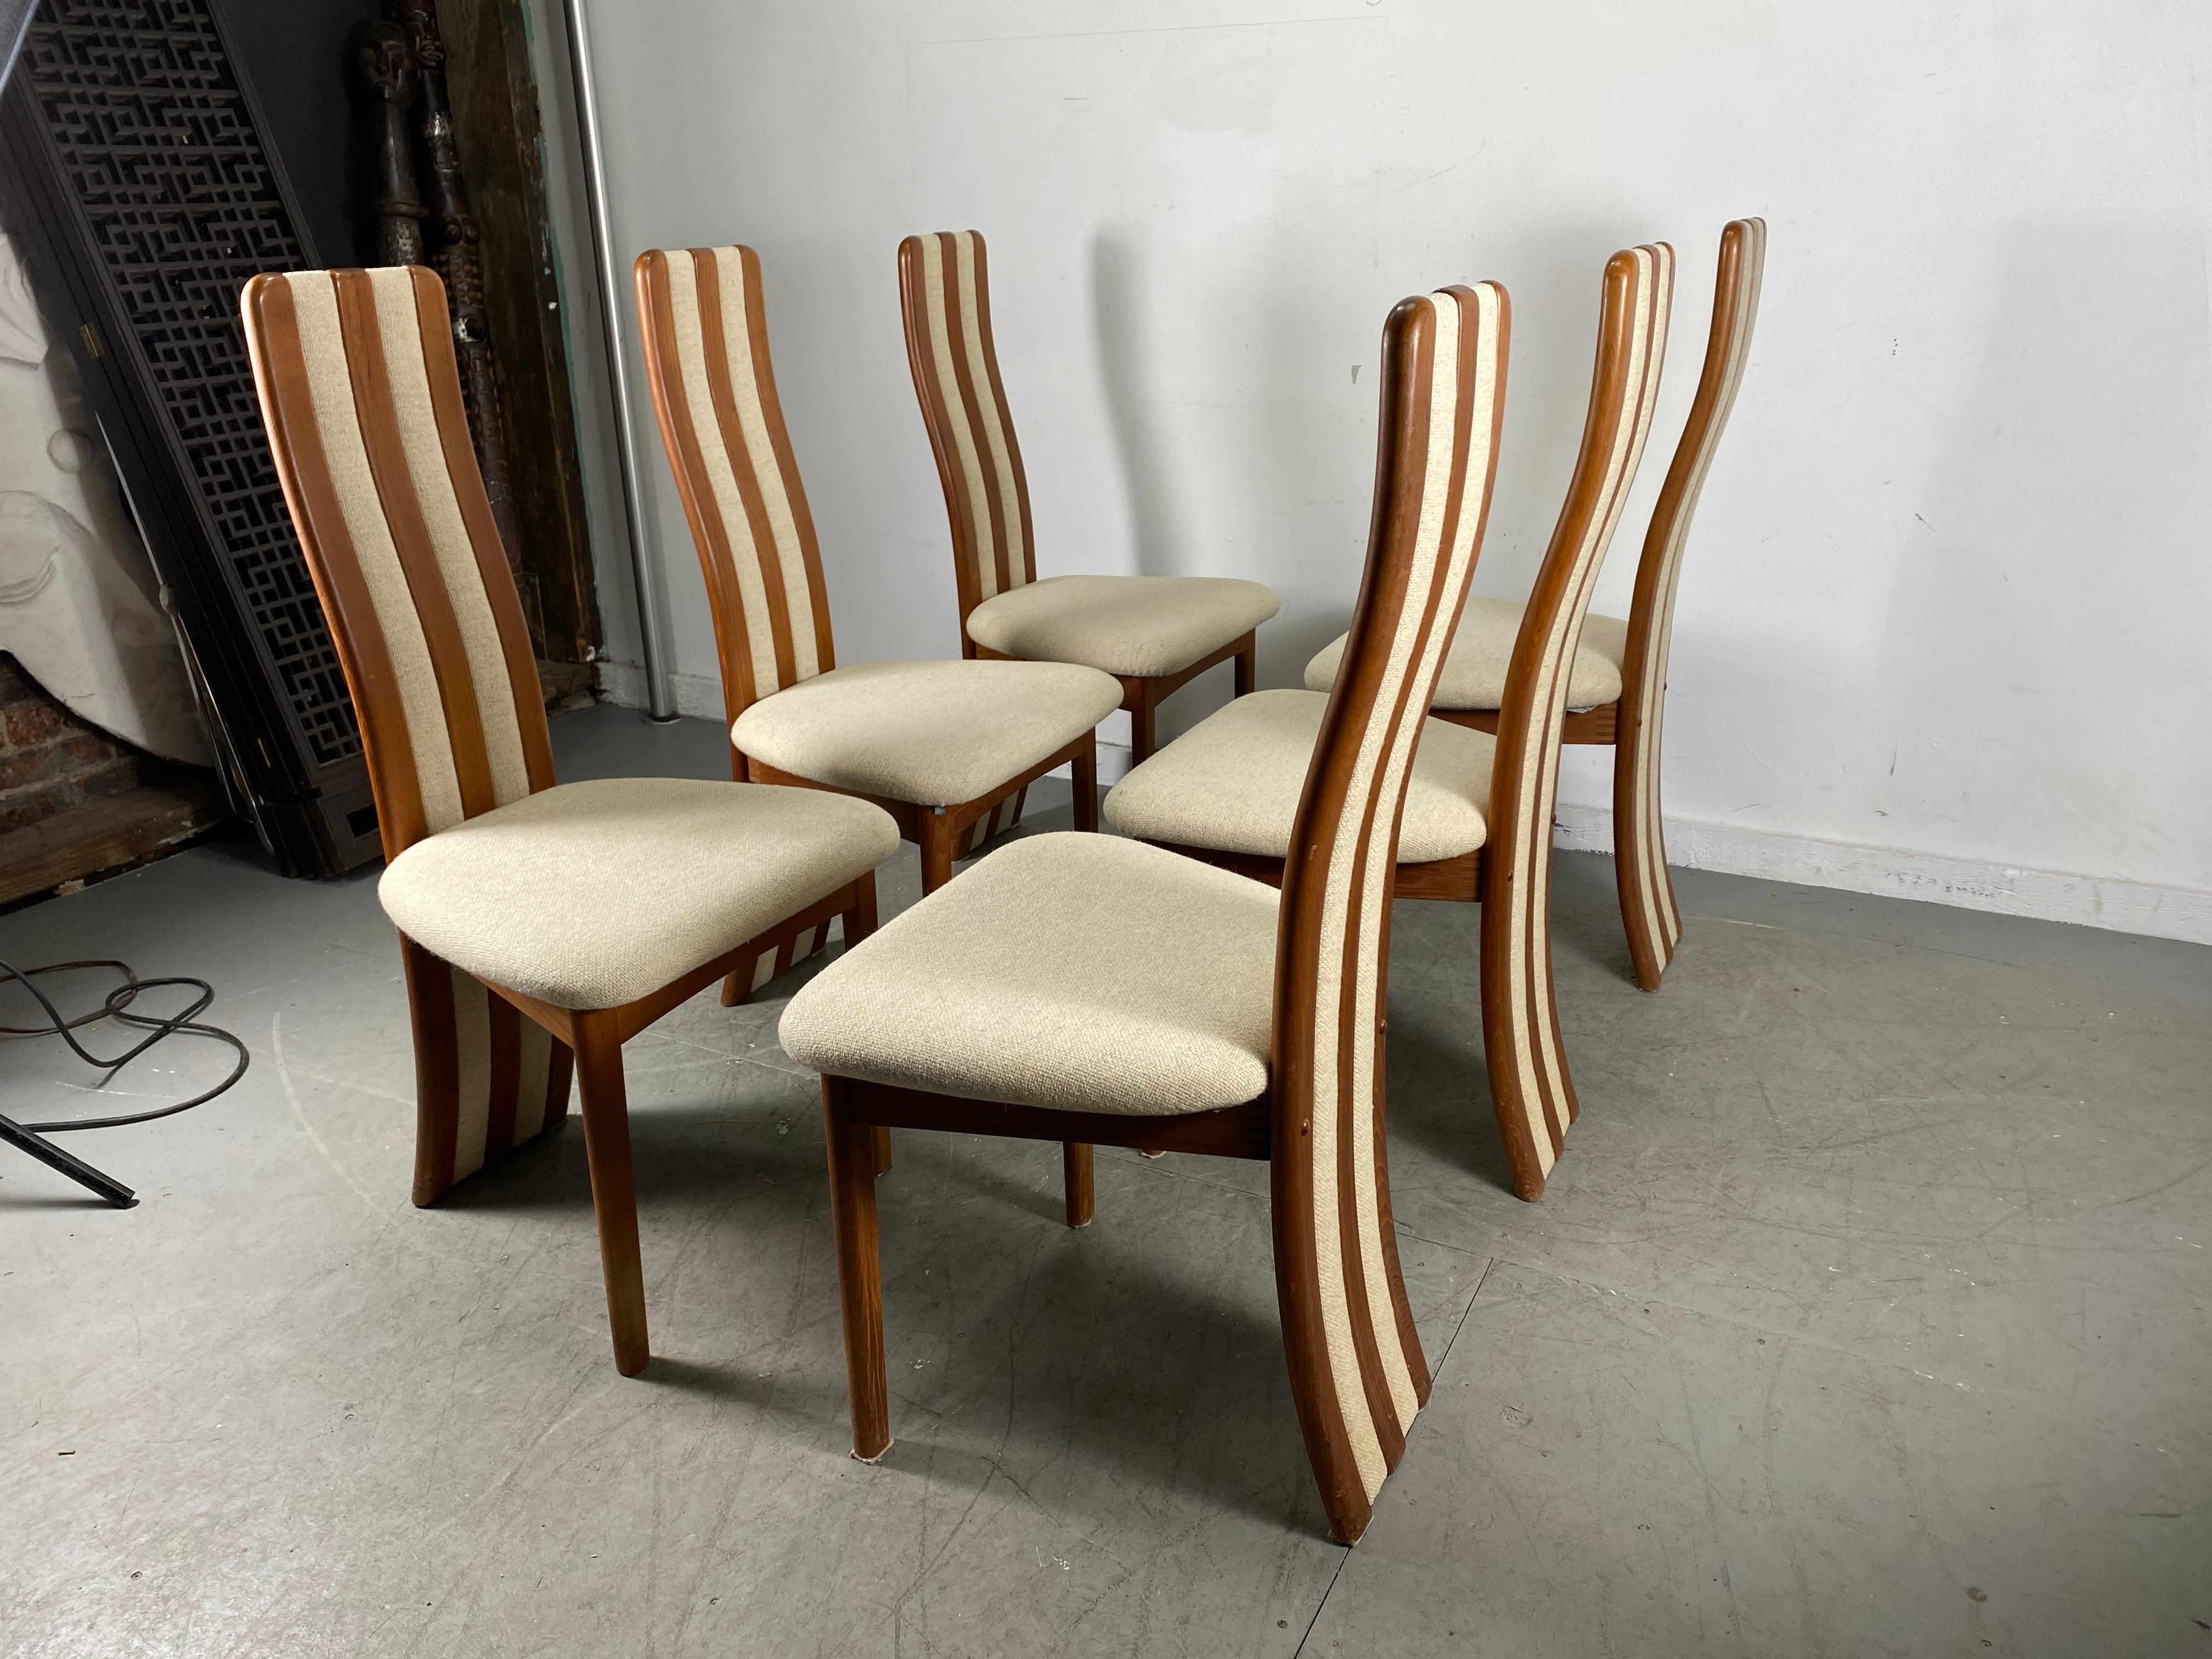 6 high back dining chairs